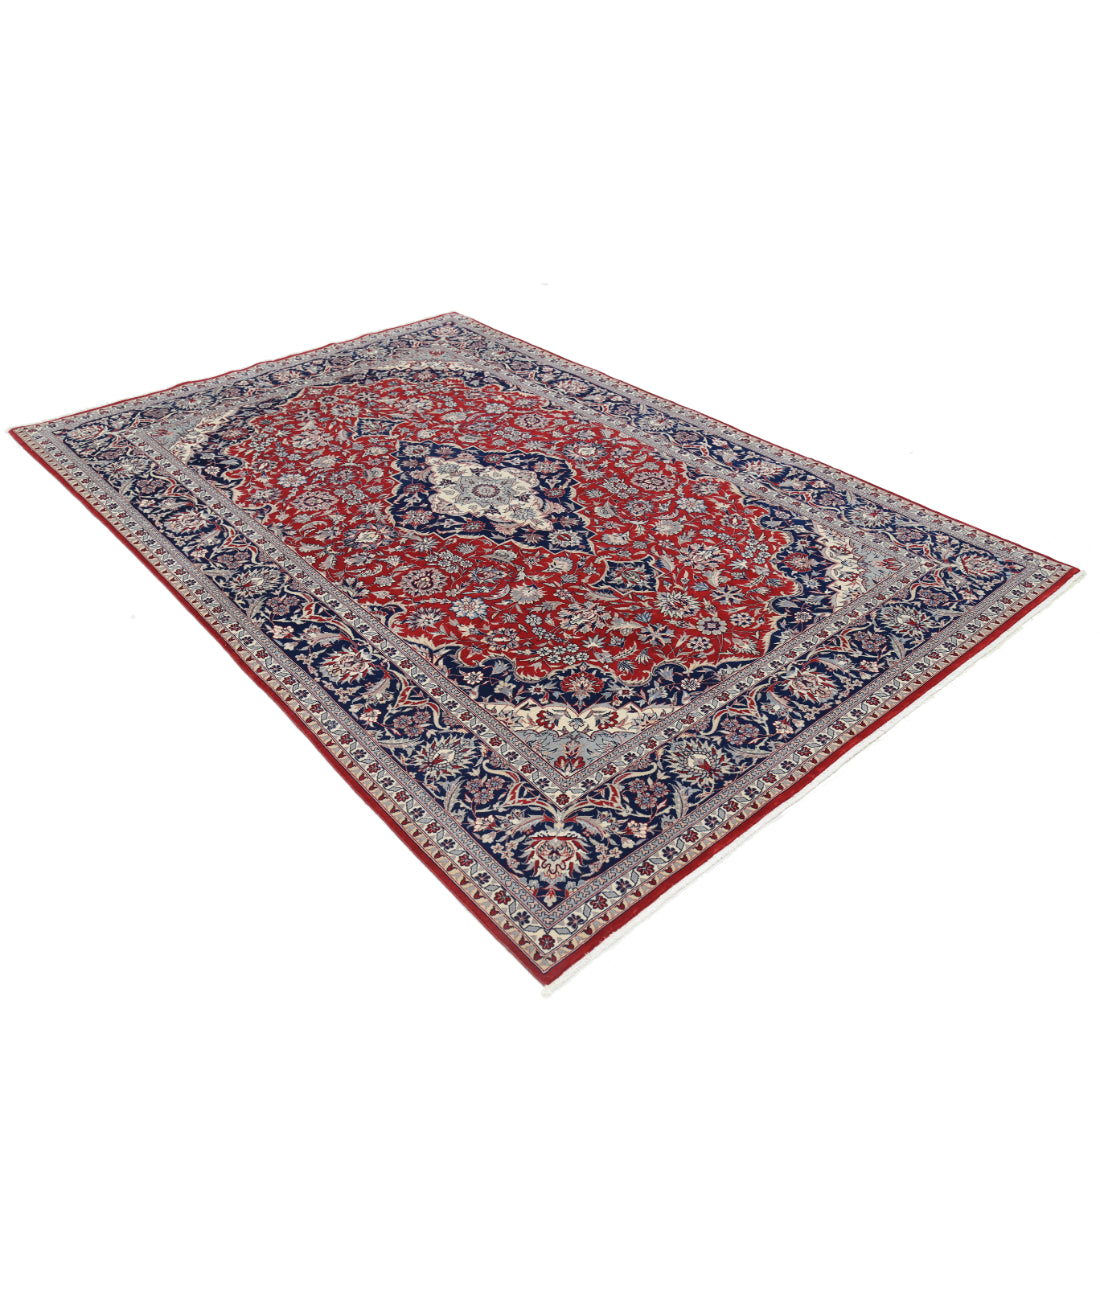 Heritage 6' 0" X 8' 11" Hand-Knotted Wool Rug 6' 0" X 8' 11" (183 X 272) / Red / Blue